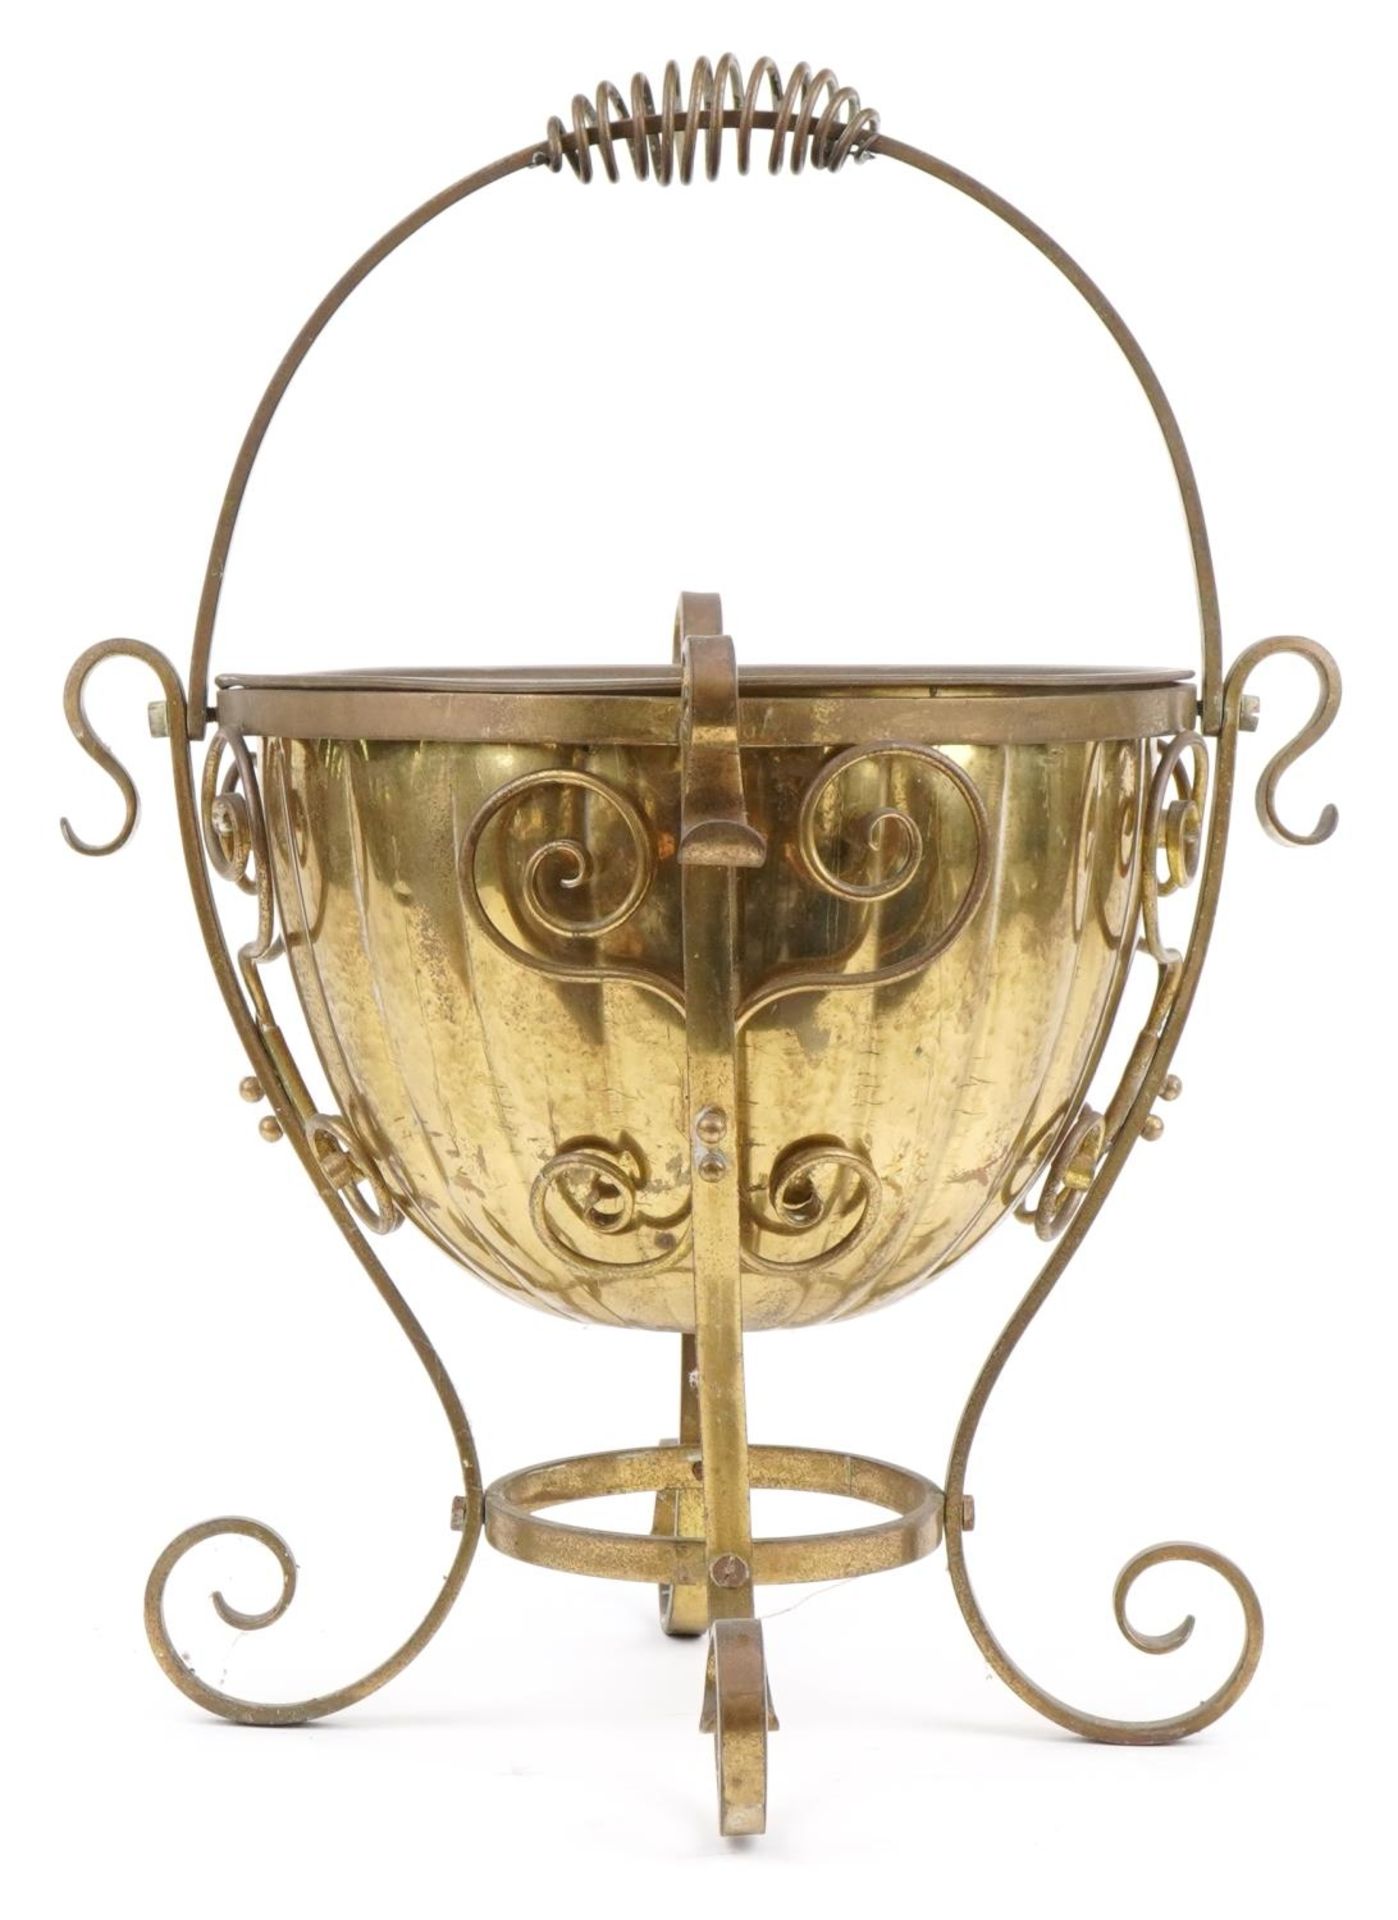 19th century style brass log bucket with swing handle, 45cm in diameter : For further information on